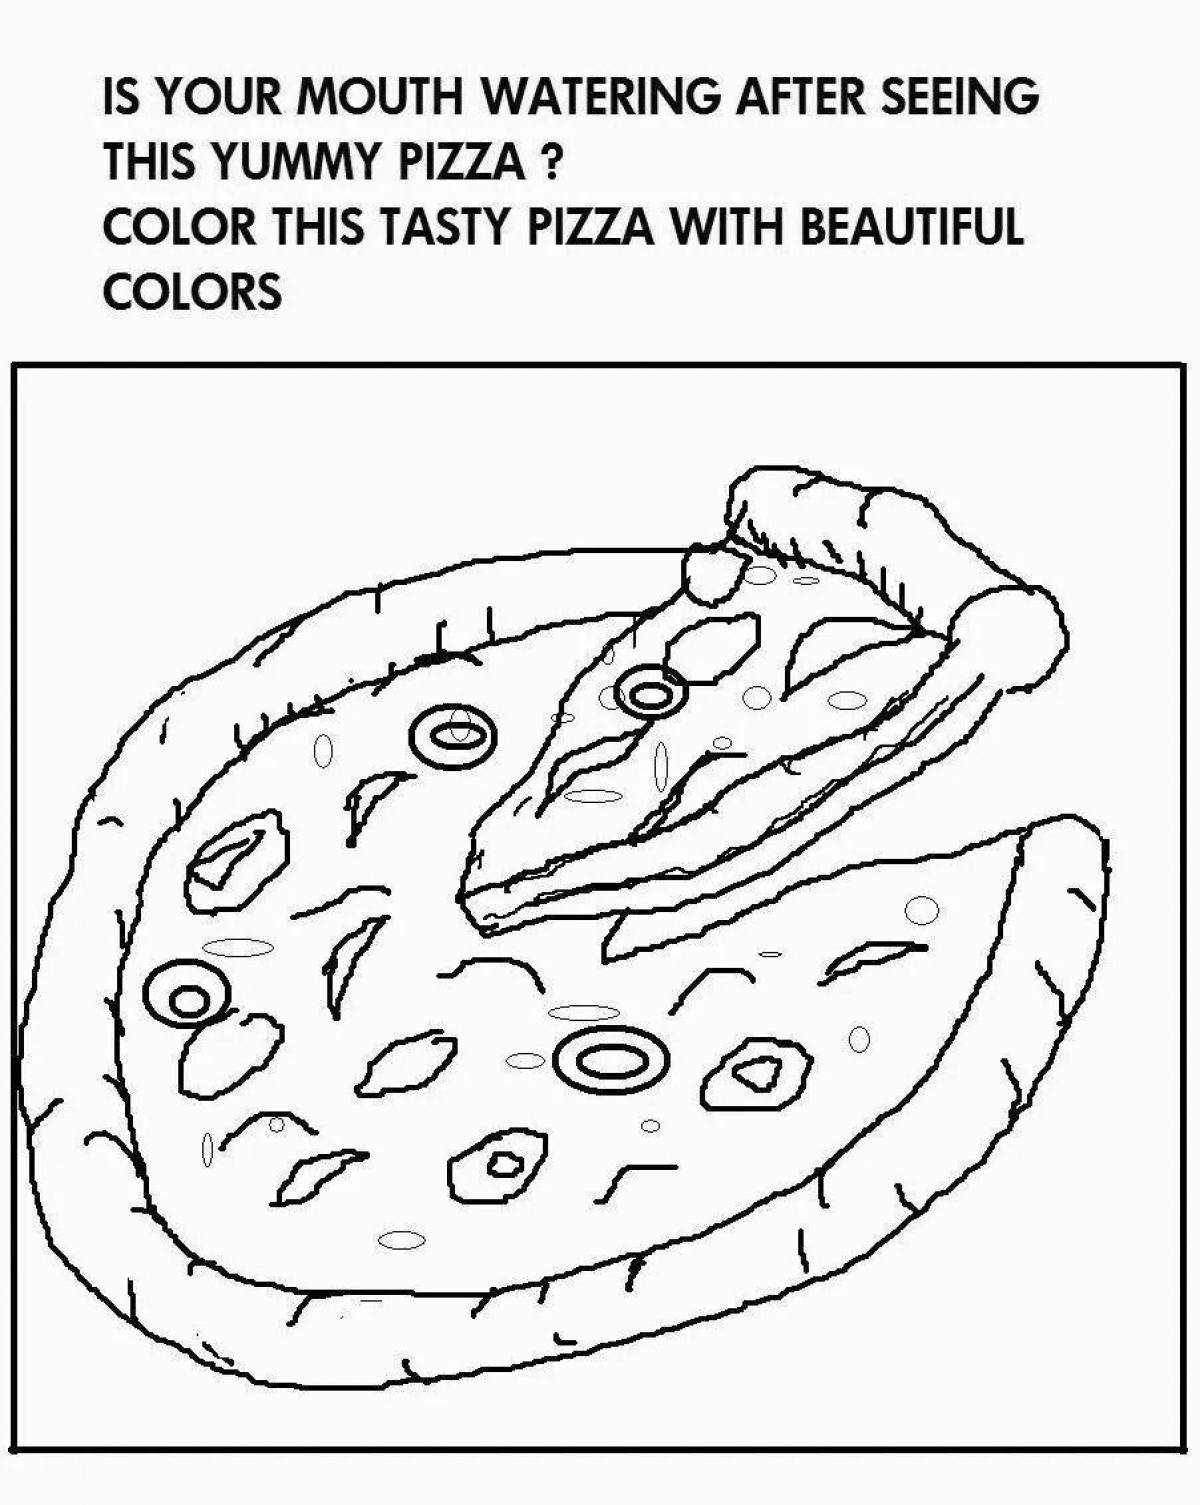 Appetizing pizza coloring book